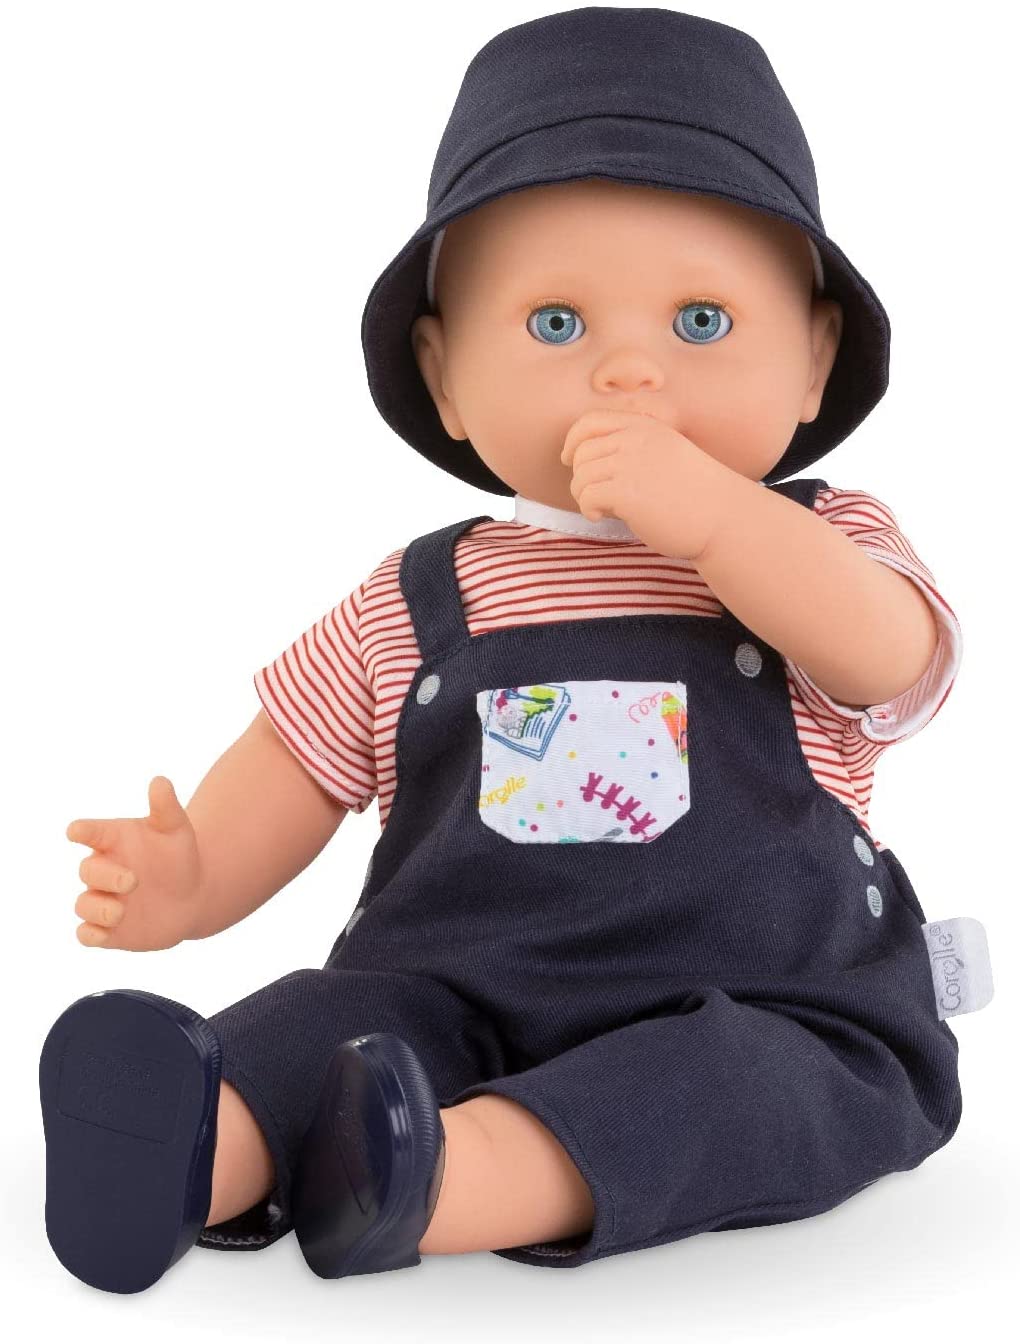 Corolle Mon Grand Poupon Augustin Little Artist - 14" Boy Baby Doll - Outfit Includes Overall with Pocket, Hat and Shoes, for Ages 2 Years and up